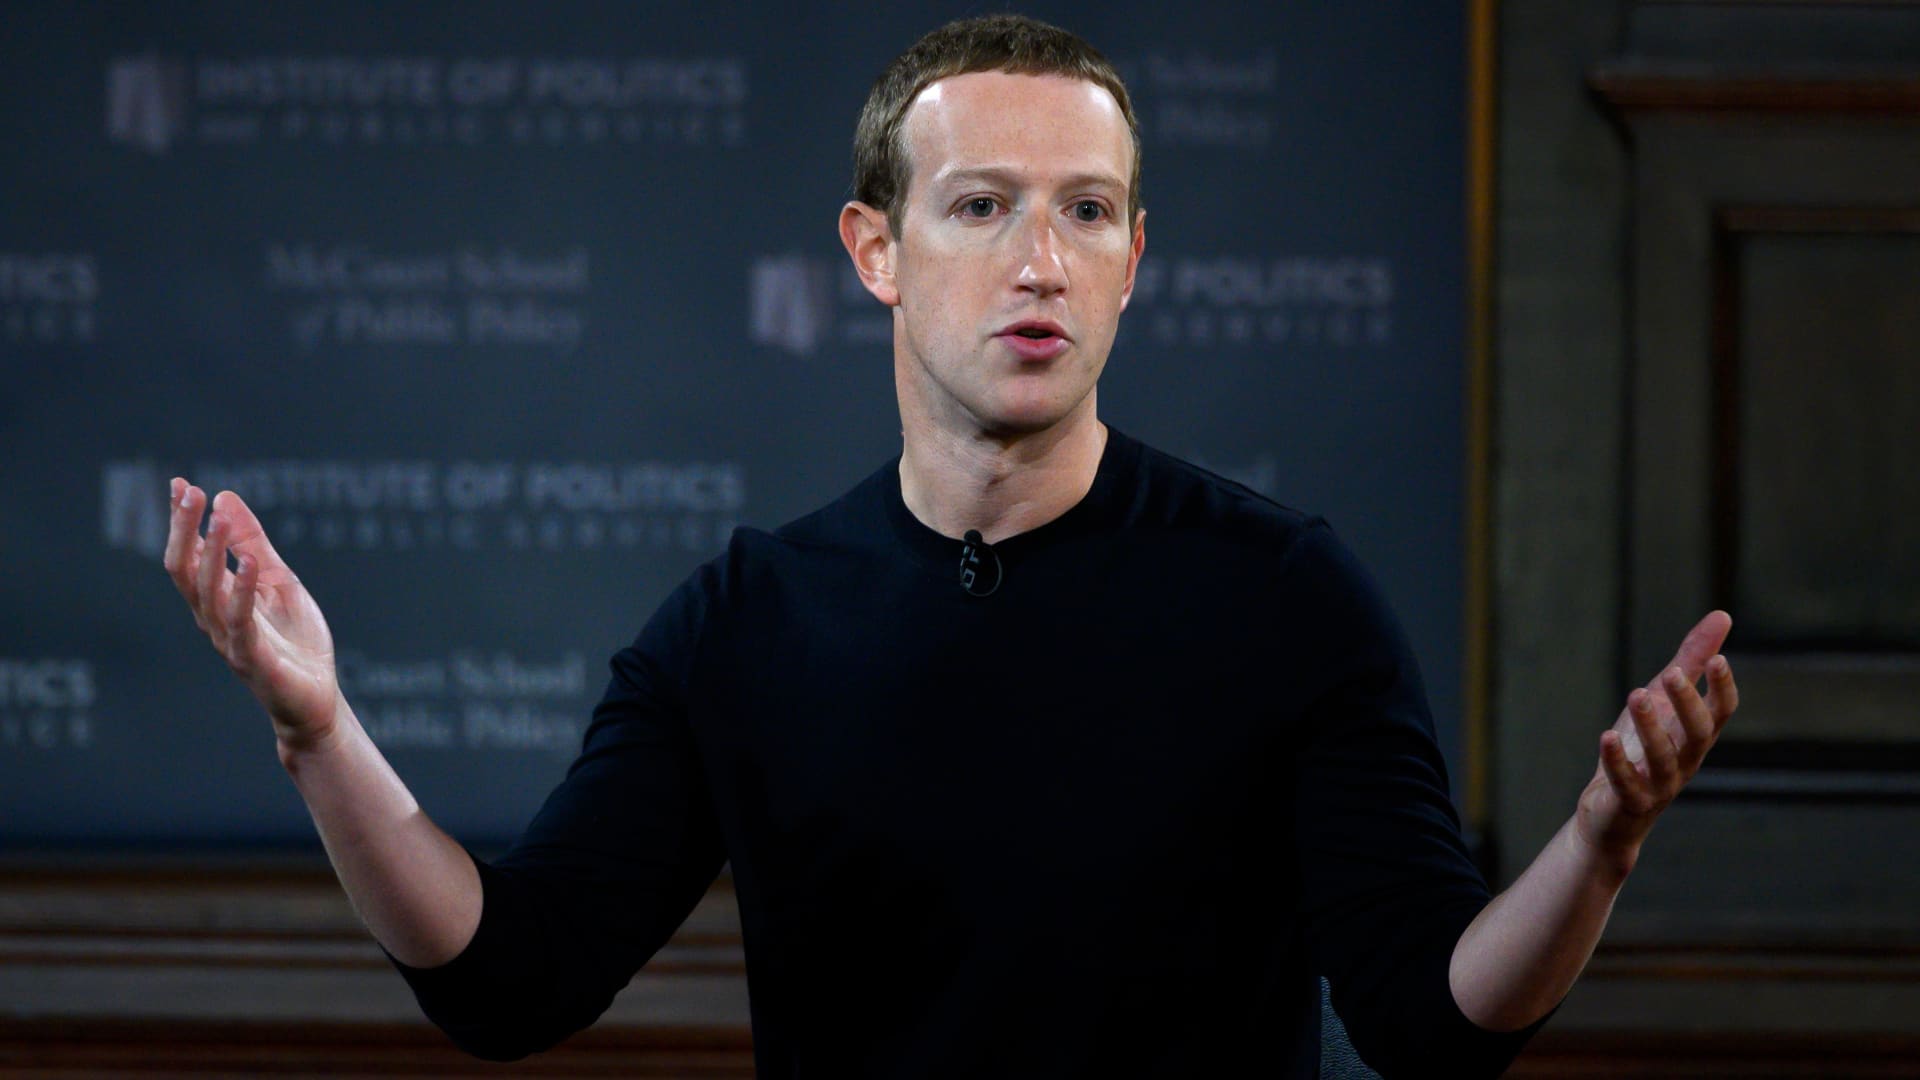 Mark Zuckerberg says economic downturn is here, so Meta must do more with less